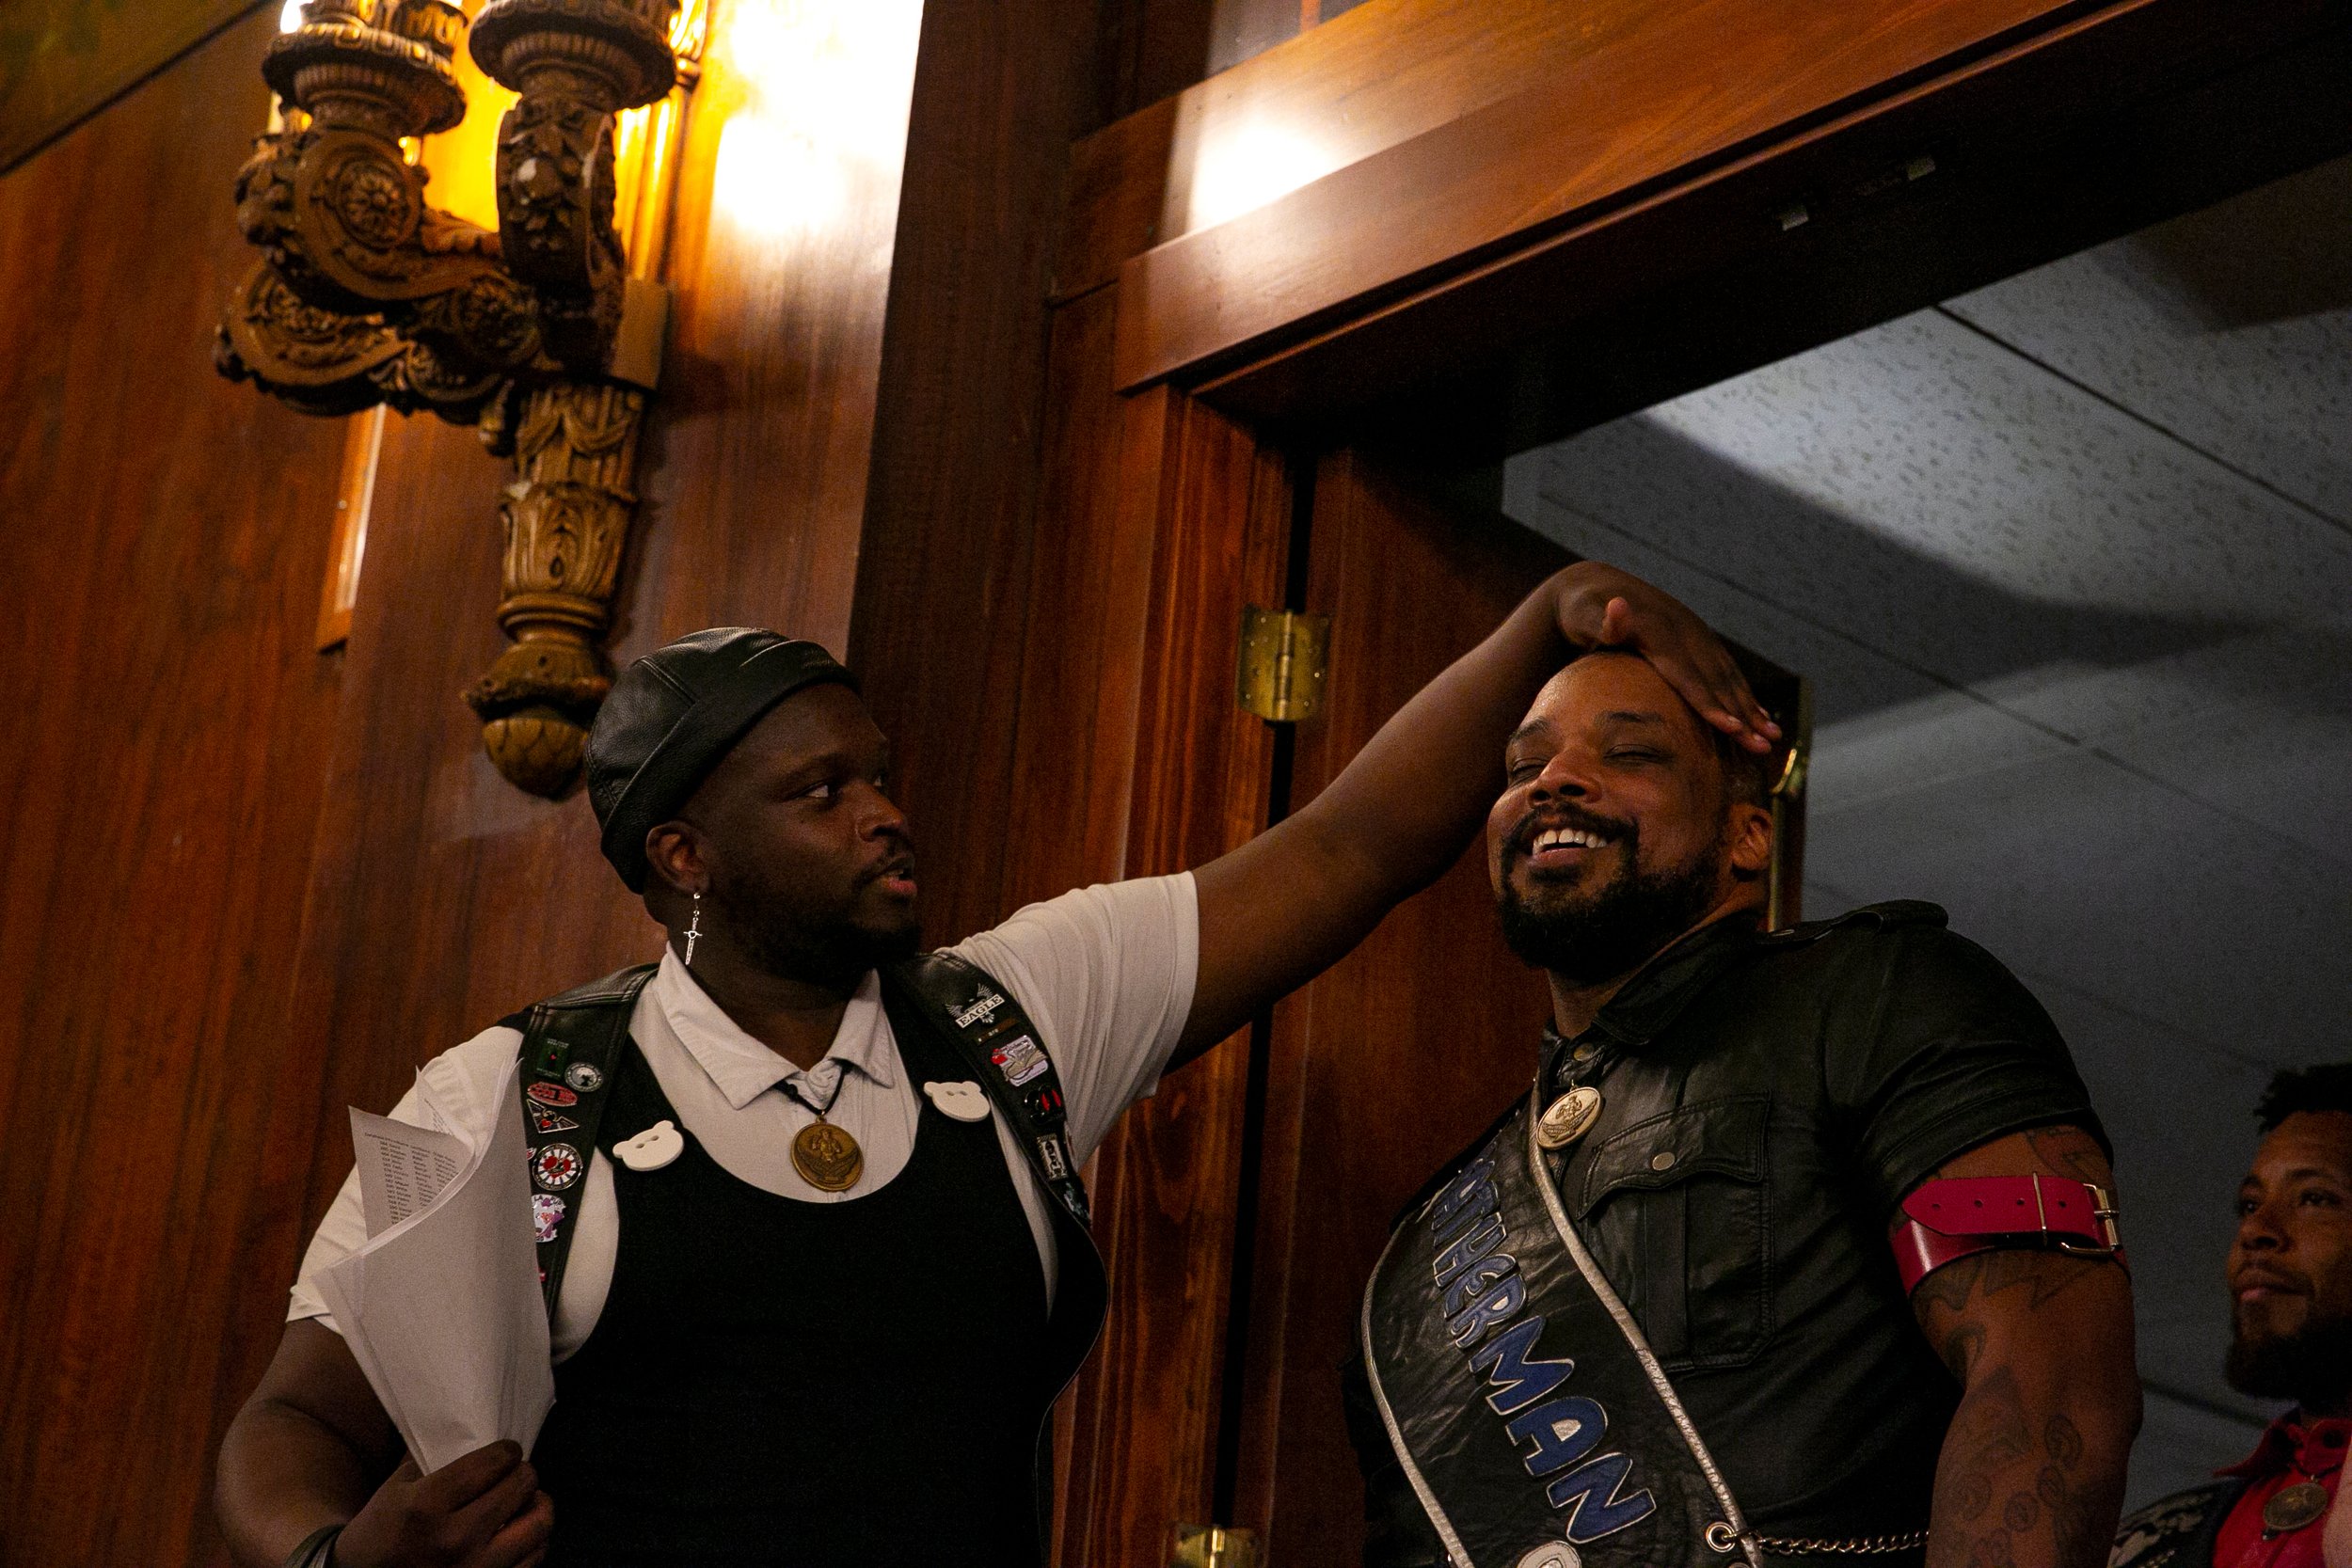  Contestant Handler Kenzo Onyx, wipes Leatherman of Color 2023, Phobos Onyx’s brow before he makes his debut entrance during the Opening Ceremonies of International Mister Leather 45, held in The Florentine Room at The Congress Plaza Hotel, Thursday 